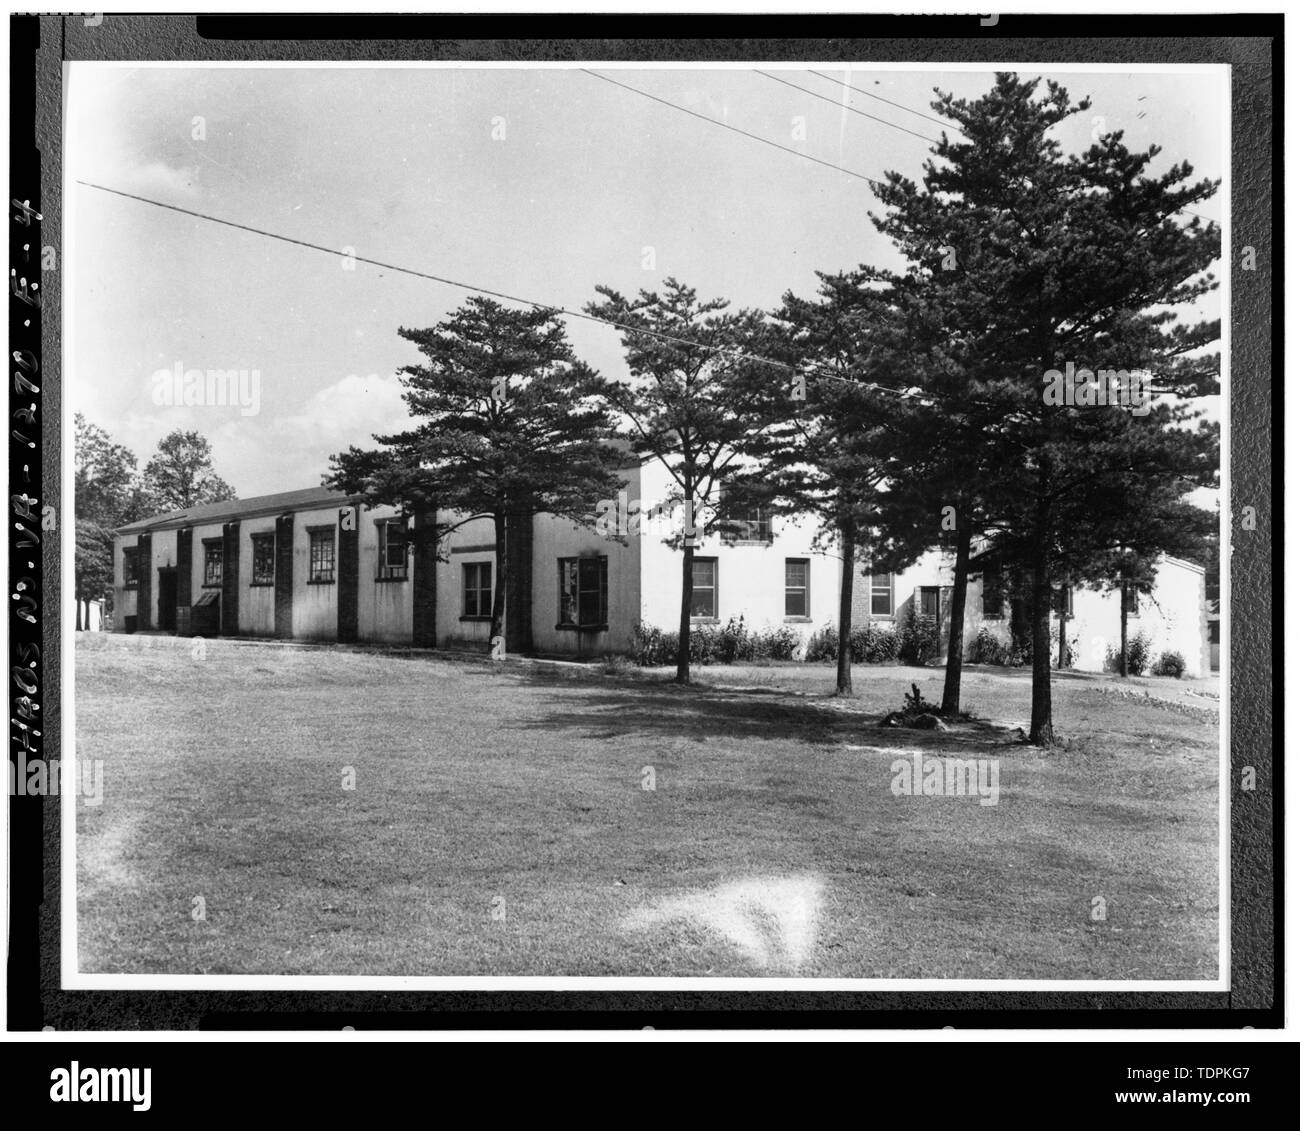 ca. 1944 (original print on file at U.S. Army Intelligence Security Command, Fort Belvoir, Virginia). VIEW TO SOUTHEAST. - Arlington Hall Station, Building No. 110, 4000 Arlington Boulevard, Arlington, Arlington County, VA; Van Dyke, Tine, transmitter Stock Photo